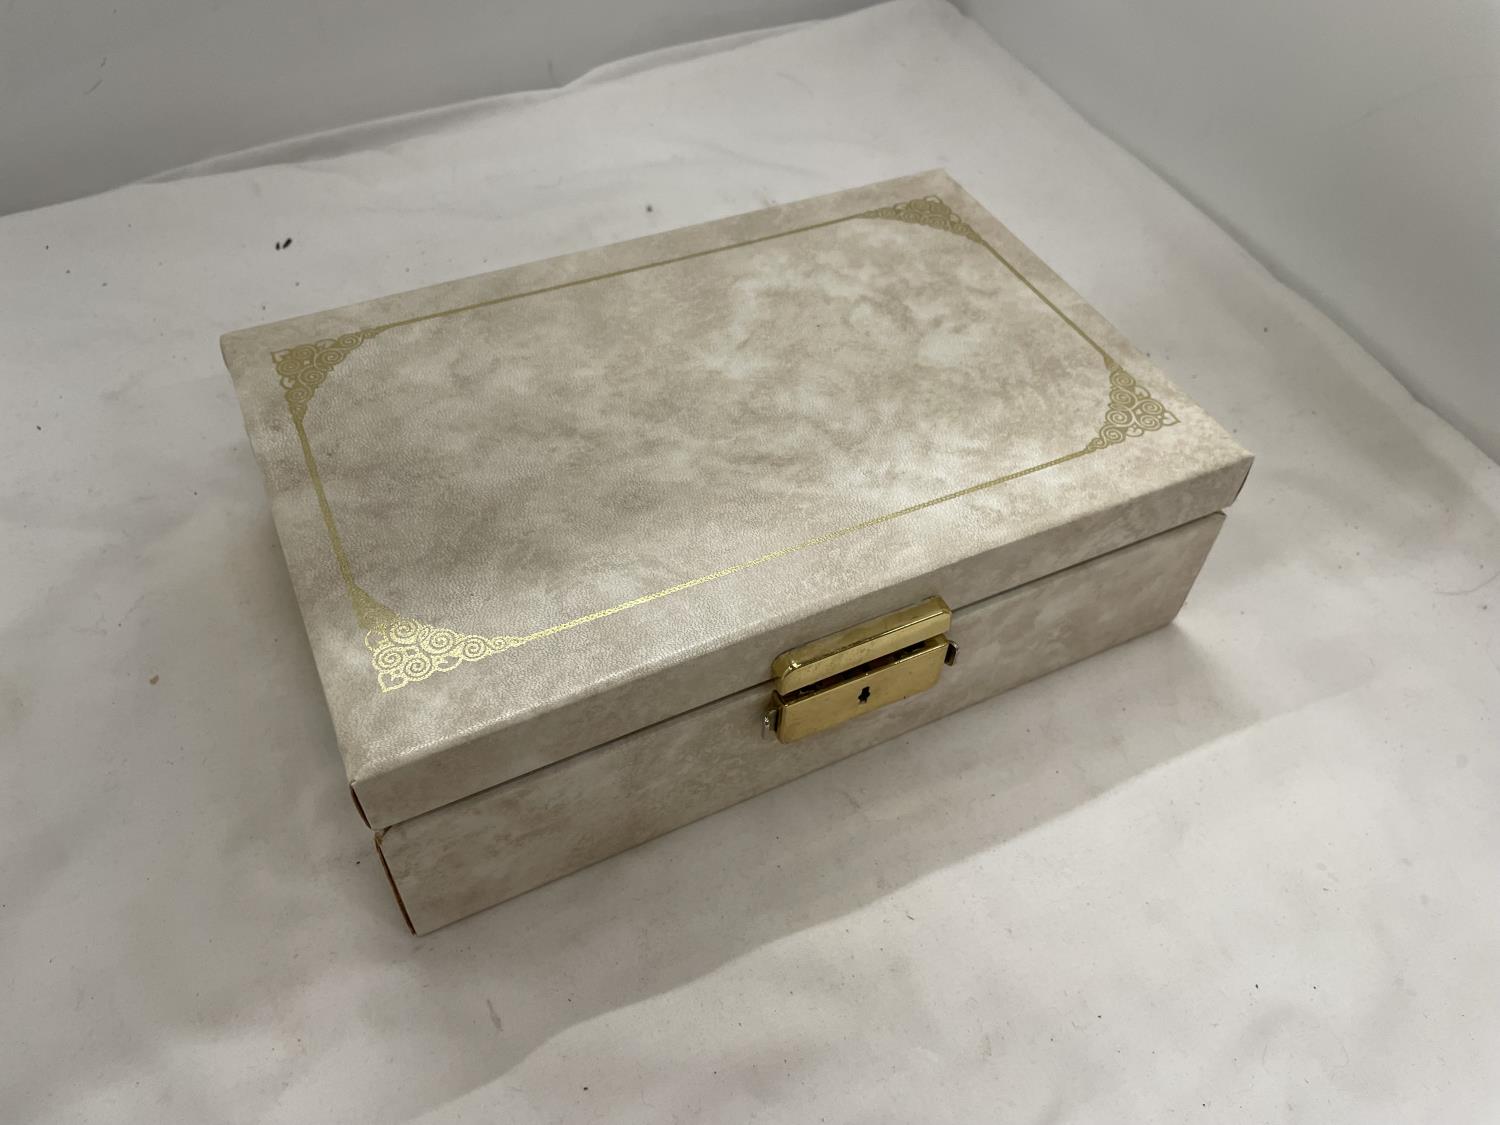 A JEWELLERY BOX CONTAINING WATCHES, BRACELETS, NECKLACES, EARRINGS, ETC - Image 7 of 8